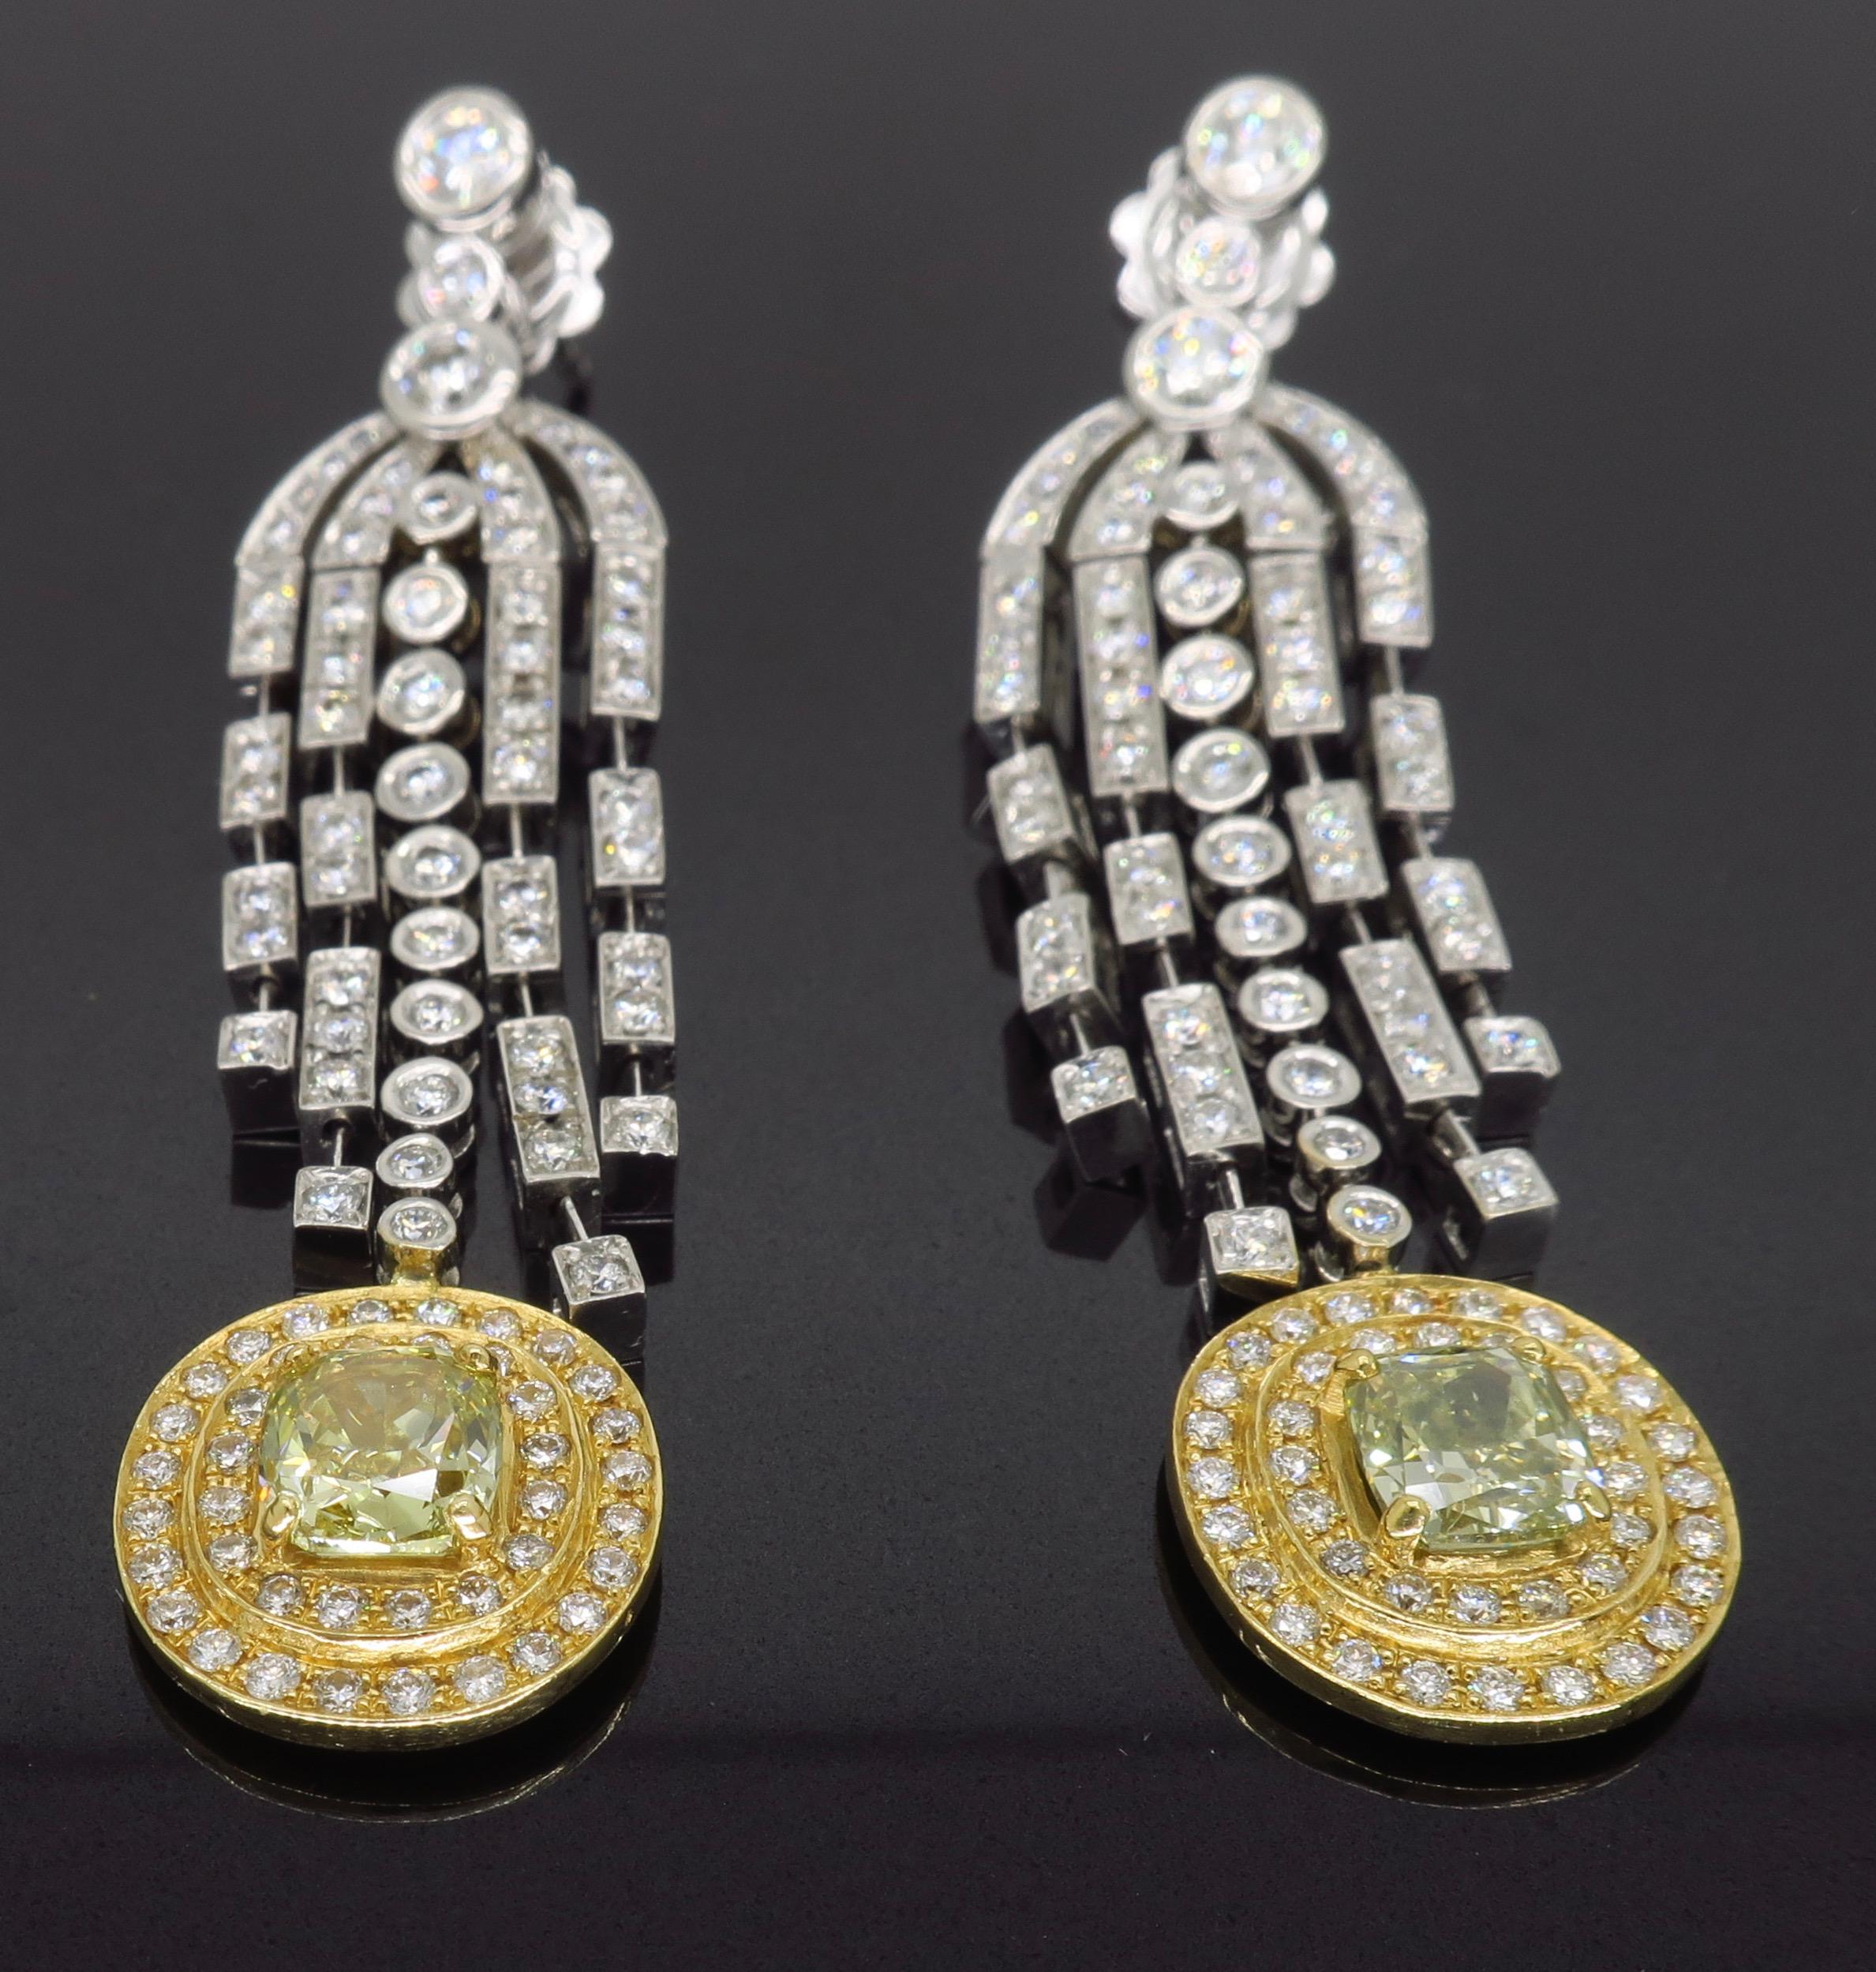 Fancy colored chandelier style diamond earrings crafted in 18k gold.
 
Center Diamond Carat Weight: Approximately .73CT and Approximately .69CT
Center Diamond Cut: Cushion Cut 
Center Diamond Color: Fancy Brownish Greenish Yellow
Center Diamond